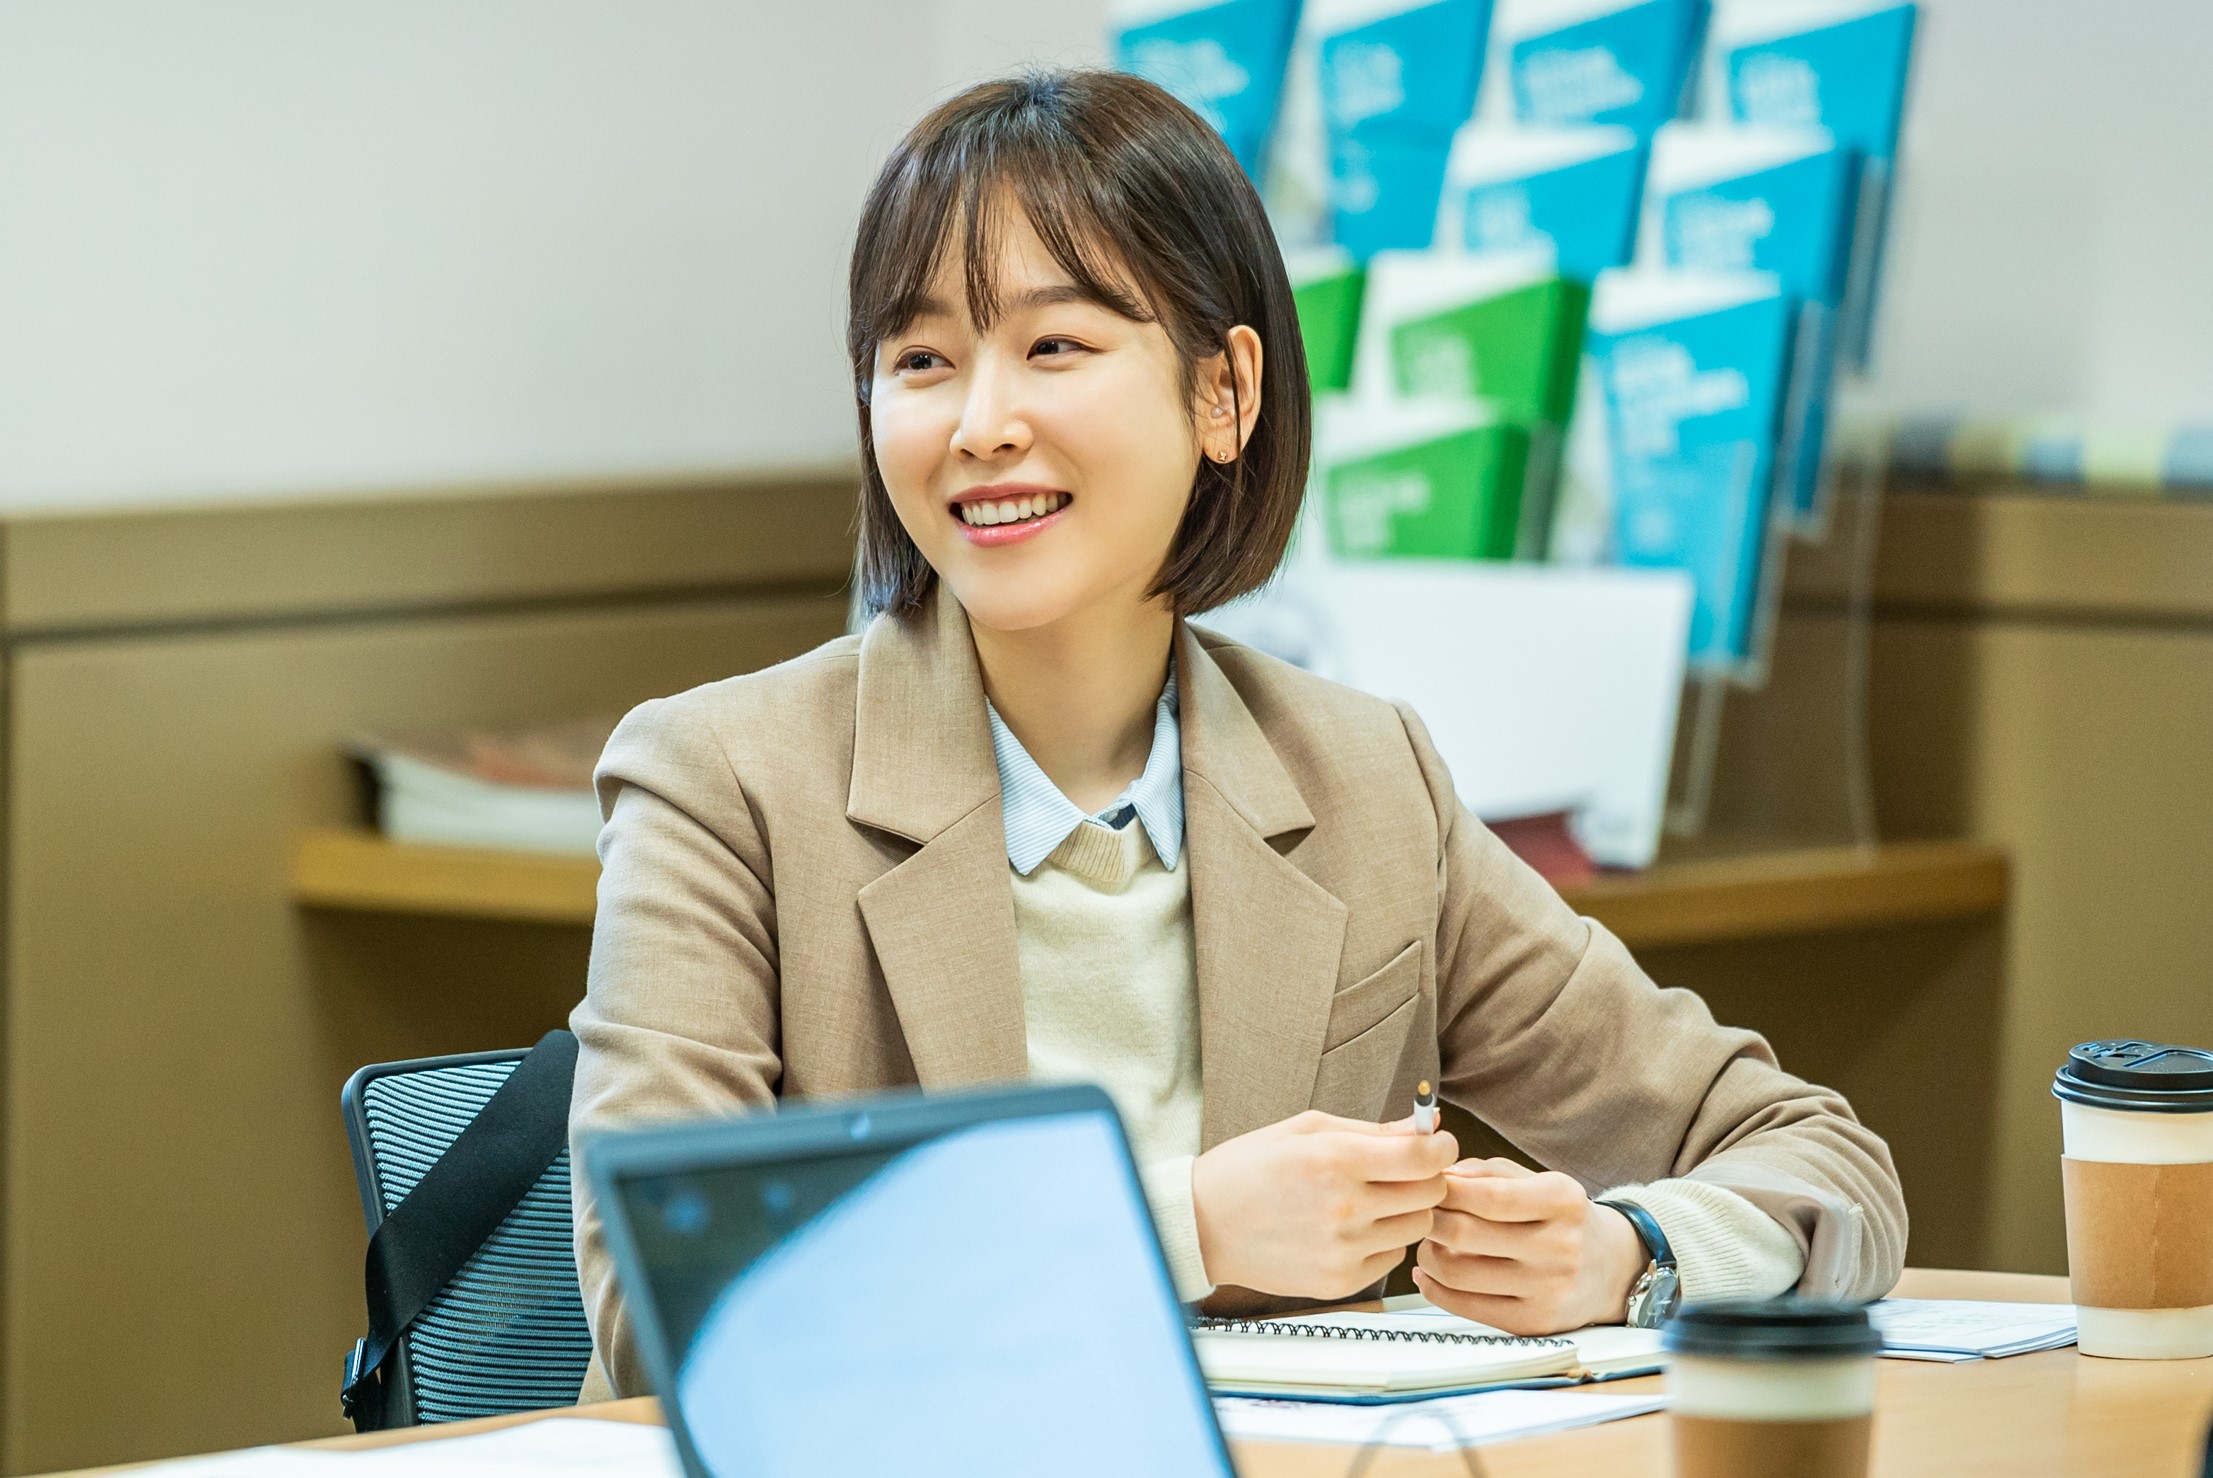 Black Dog Seo Hyun-jin, Ra Mi-ran, Ha Joon, and Lee Chang-hoon are empathizing with viewers by radiating the best team chemistry.TVN Mon-Tue drama Black Dog (director Hwang Joon-hyuk, playwright Park Joo-yeon, production studio Dragon, and Urban Works) will be on the 4th, and will catch the attention by unveiling the warm-hearted shooting scene behind the four students of the university who are responsible for pleasant laughter and warm sympathy.In the last broadcast, ahead of the resurrection of the deepening class, the courageous choice of the department of admission, which decided to face the school system problem for the students, gave a heavy echo.The department of education, which has been trying to reveal the uncomfortable truth about the pre-learning problem of private education that everyone knows but could not easily say.The voice of the painful self-reflection conveyed by Park Sung-soon (Ra Mi-ran), the head of the department of education, left a deep lull at the gathering of all fellow teachers.The first meeting of the department of admission, which encourages each other and pledges to take a step forward for students, made the hearts of the viewers warm.The existence of the high sky (Seo Hyun-jin), who is growing up as a true teacher, and the college students Park Sung-soon, Do Yeon-woo (Ha Joon), and Lee Chang-hoon (Lee Chang-hoon) who are the strong fences of the teacher in Black Dog, are the factors that double the fun and impression of the drama.The struggle of the department of admission, which does its best to win the fierce college entrance war with a hot heart toward students more than anyone else, gives a wide sympathy.Meanwhile, the scene of the full-blown shooting in the public photos shows their Moonlighting Team Chemie.I started a teaching career that was not smooth with the tag of parachute unexpectedly, but Seo Hyun-jin, who has a different level of empathy through high sky that learns his own survival strategy and goes forward.It is also interesting to shoot with Kwon So-hyun of Song Ji-sun station, which was the decisive occasion for the high sky to have the goal of the Orthodox.Song Ji-sun, a fellow teacher who has sincerely supported each other in the same position, adds warmth to the synchronized appearance of two people who look at the same place with a script and smile.If you join together in the ensuing photos, the playful appearance of the entrance department, which vertically rises the honey jam power, automatically raises the corners of the viewers mouths.Ra Mi-ran, who is smiling as cool as the smile of Park Sung-soon, the head of the department, catches the eye.The sunny faces of Ha Joon and Lee Chang-hoon, who are cultivating a lot of Lanson disciples, also convey the cheerful atmosphere of the scene.The sticky teamwork of actors captured inside and outside the camera is becoming an Engine of Youth that amplifies empathy by playing a role as a fatigue recovery agent for viewers.The passion of actors who emit pleasant energy, and the intense teamwork that can be seen by the eyes, make a drama that is complete, said Black Dog. We draw another face of the school deeper and dynamically, including competition for high school to become a full-time teacher.I hope the department will be able to play a full-fledged role.Meanwhile, the 7th episode of tvN Mon-Tue drama Black Dog will be broadcast at 9:30 pm on the 6th (Month).iMBC Kim Hye-young  Photo tvN